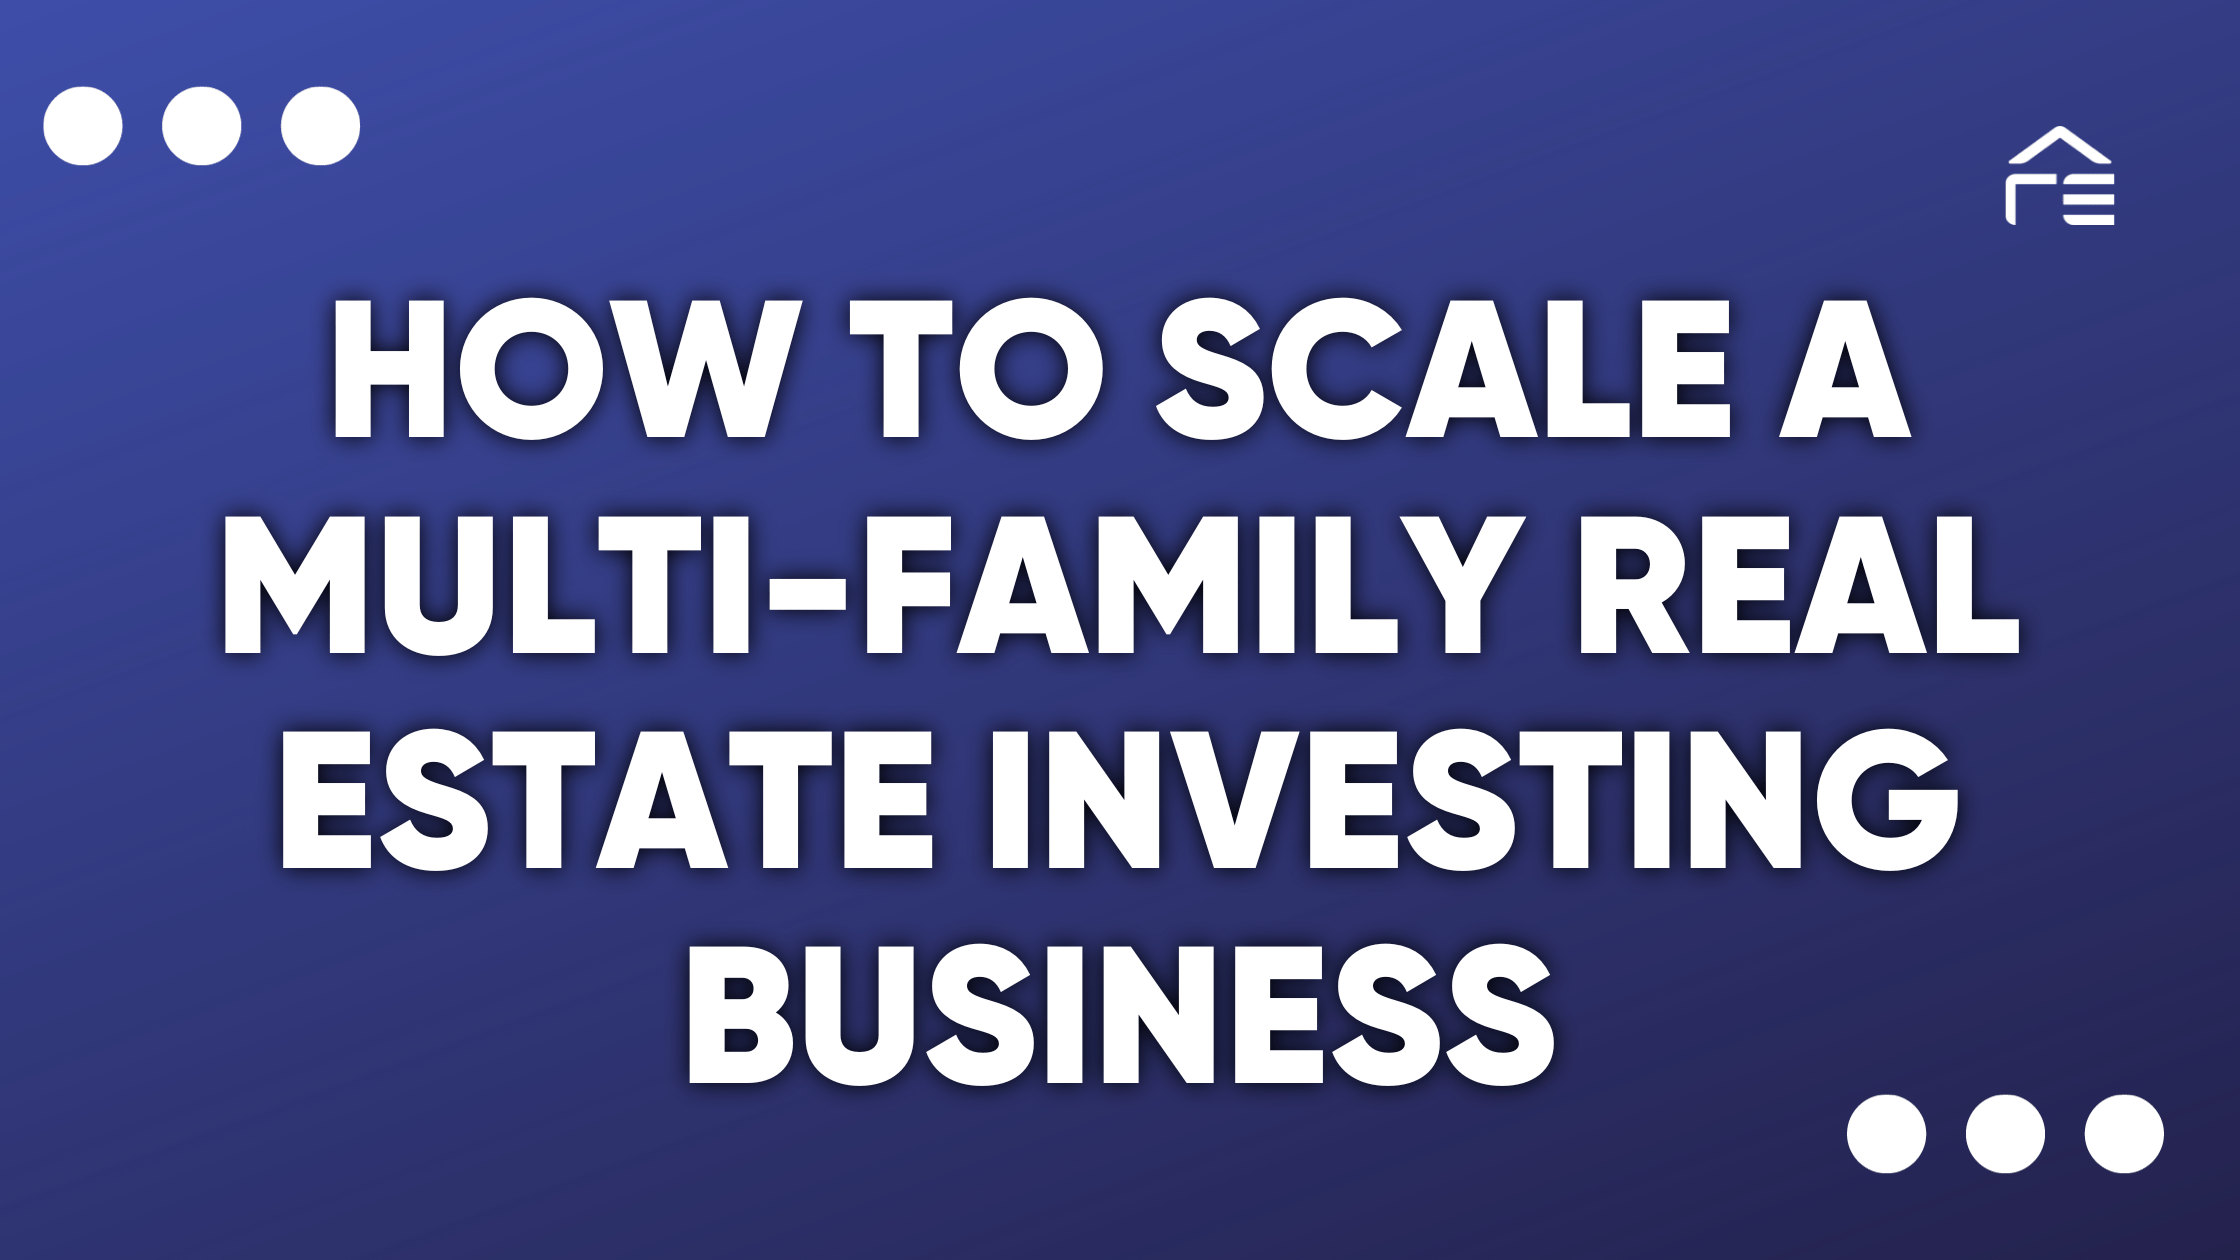 How to Scale a Multi-Family Real Estate Investing Business | Axel Ragnarsson Interview